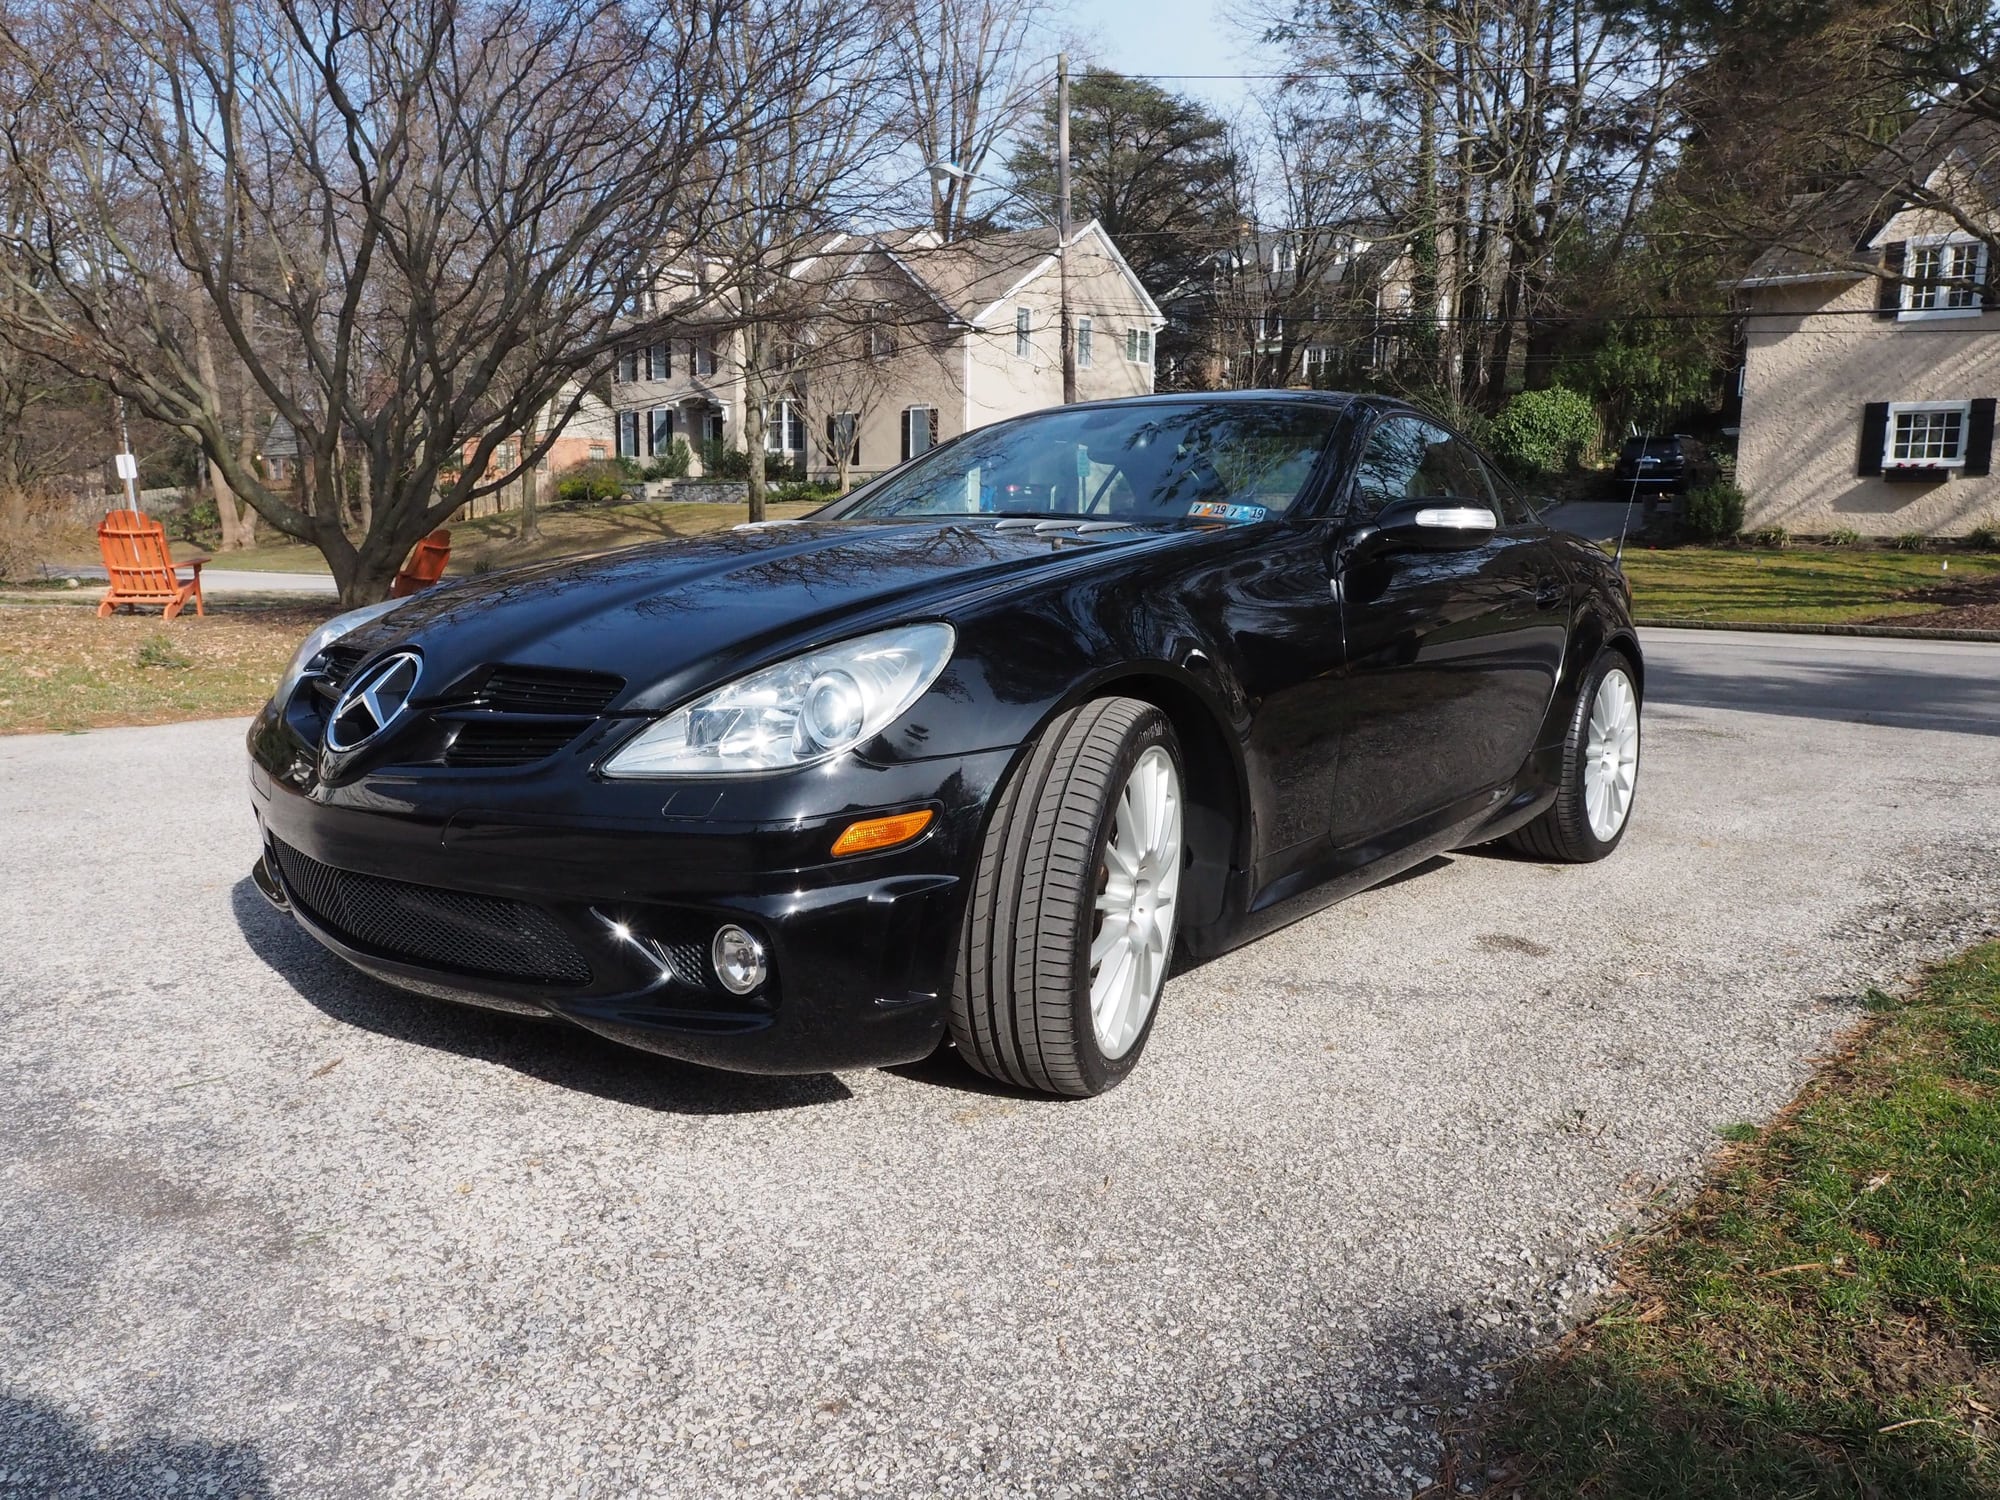 2008 Mercedes-Benz SLK55 AMG - Gorgeous SLK55 AMG, very low miles! - Used - VIN WDBWK73F48F176196 - 52 Miles - 8 cyl - 2WD - Automatic - Convertible - Black - Bryn Mawr, PA 19010, United States